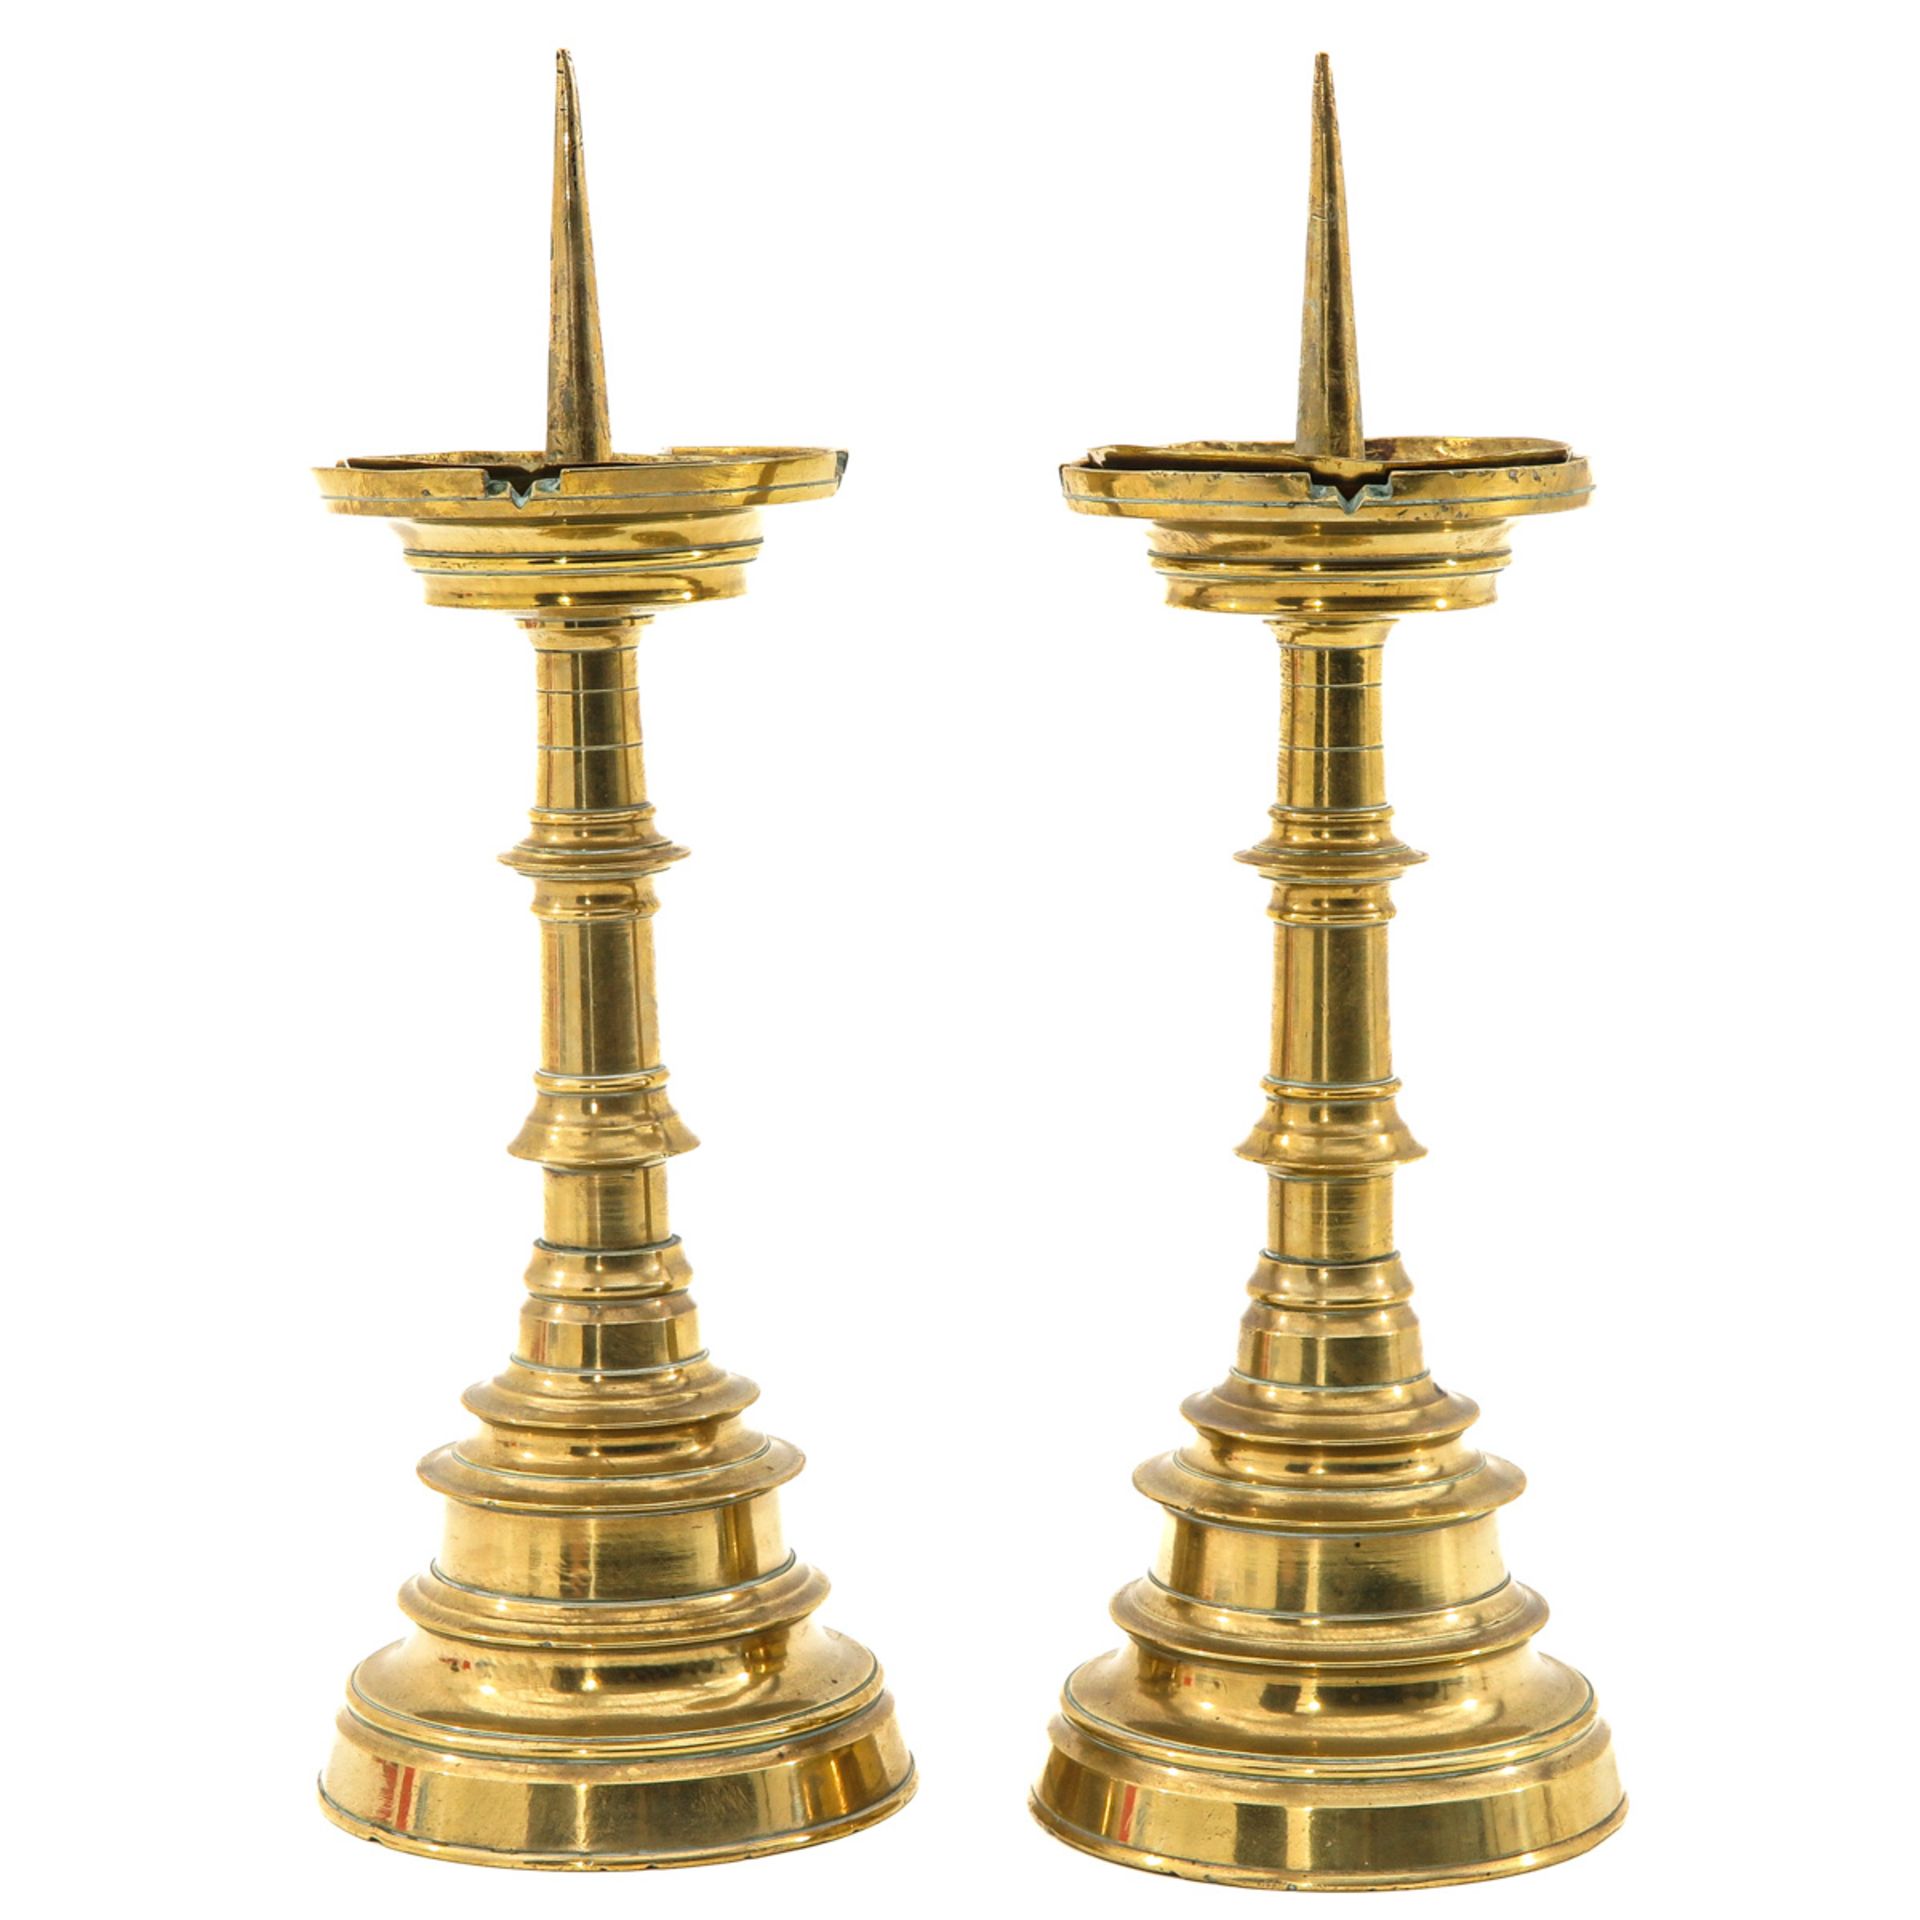 A Pair of Copper Candlesticks - Image 4 of 10